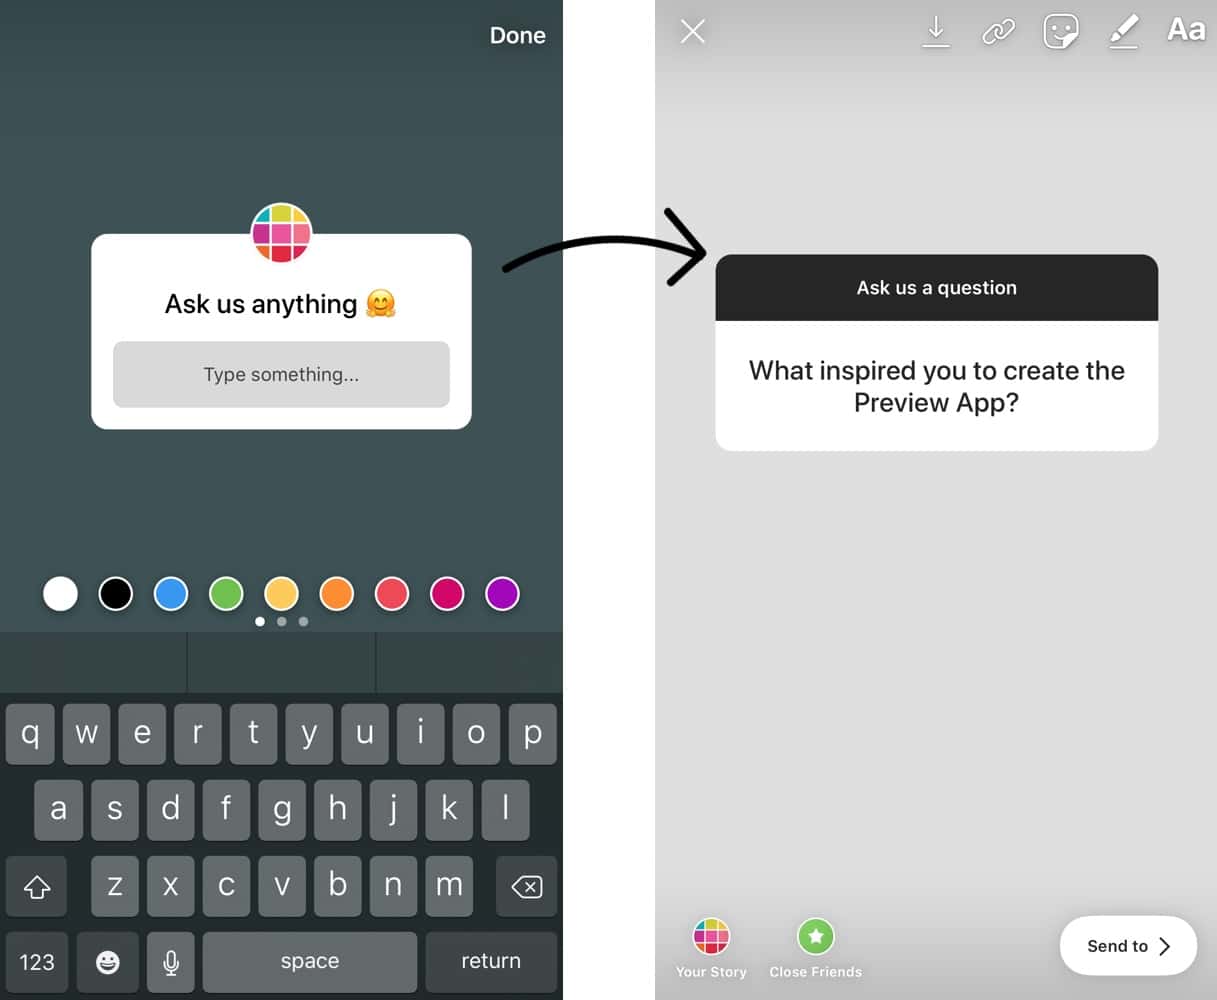 Download How to use the Question Feature in Insta Story? (tutorial + tricks + ideas) - Preview App